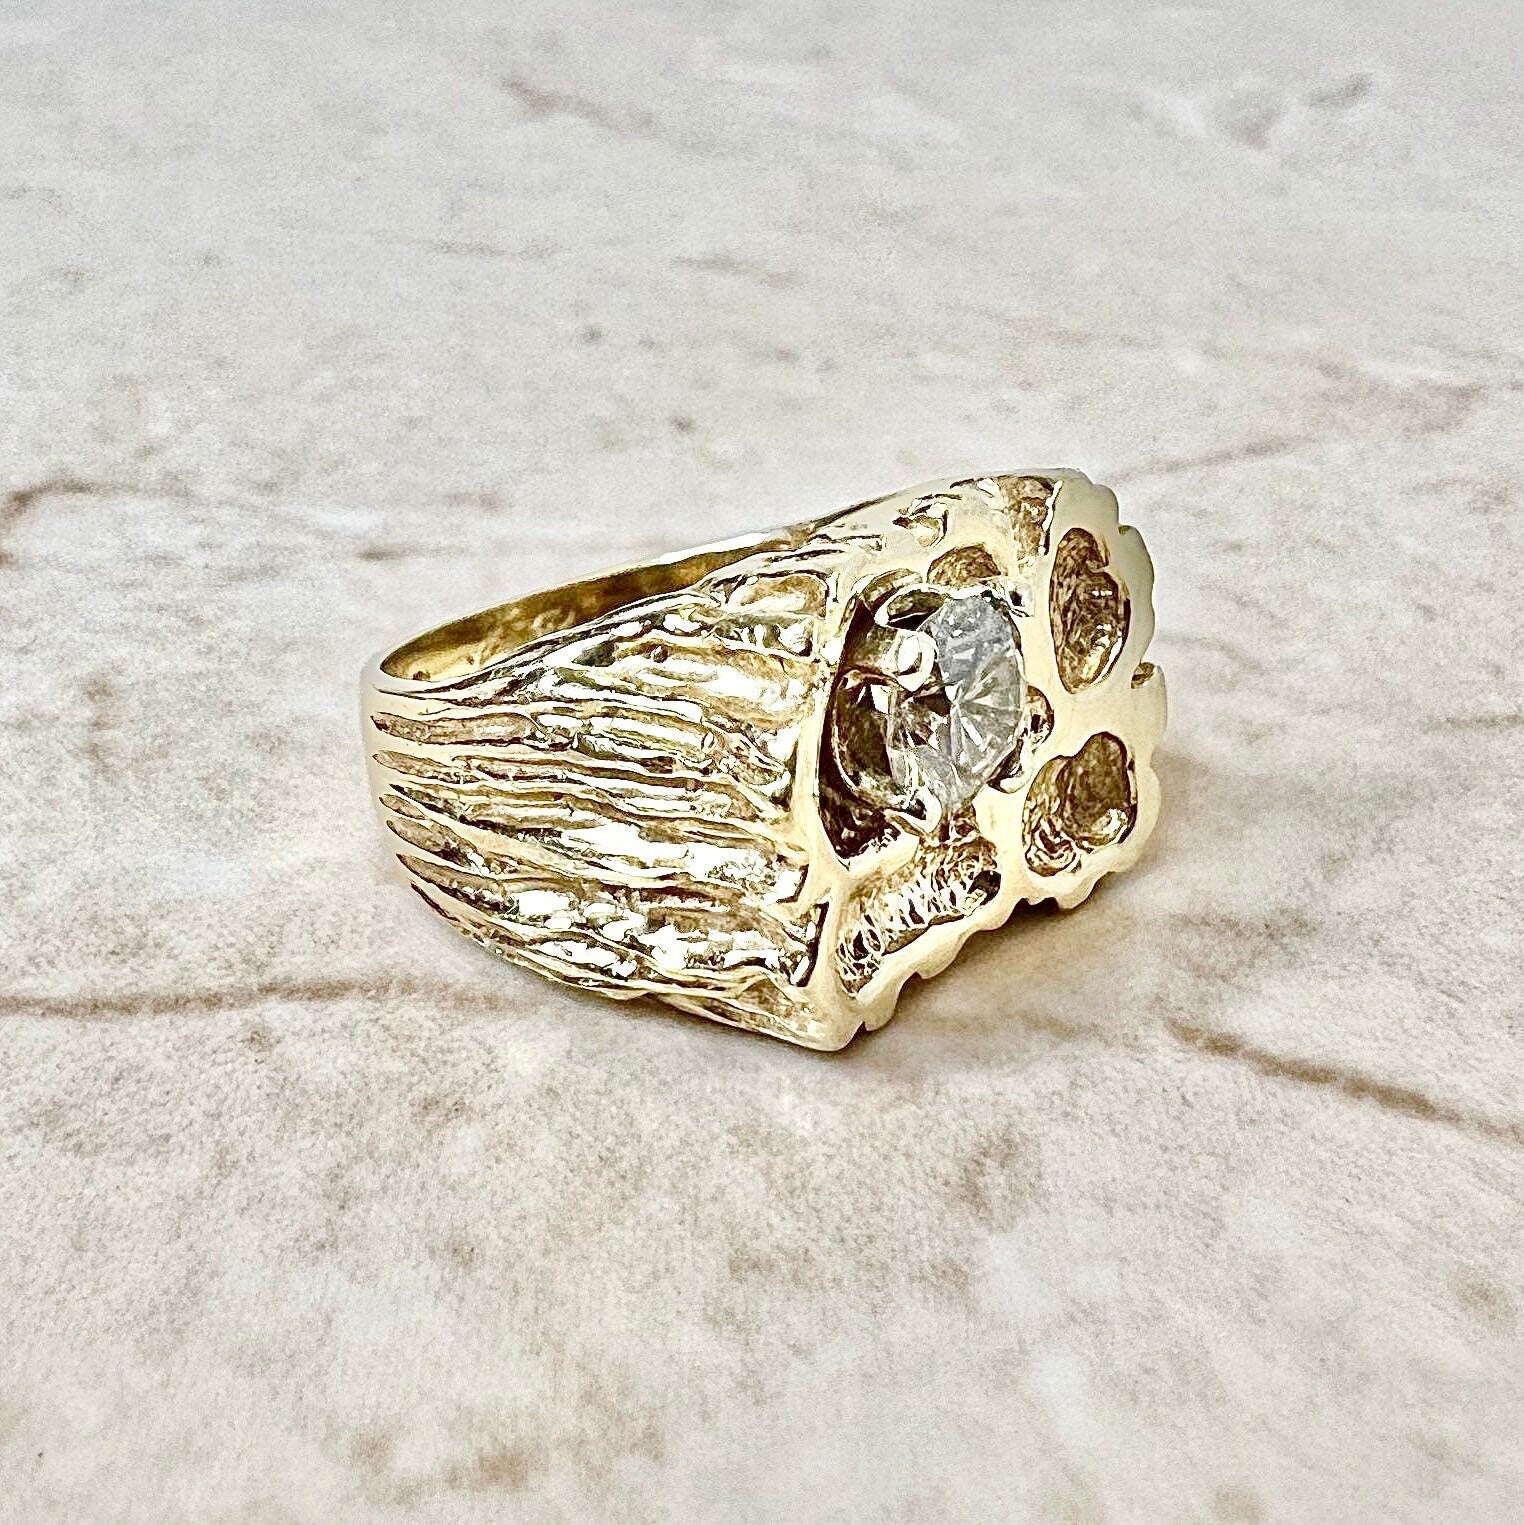 Vintage 14K Diamond Solitaire Ring - Yellow Gold Cocktail Ring - Anniversary Ring - Birthday Gift - Best Gift For Her - Men’s Ring